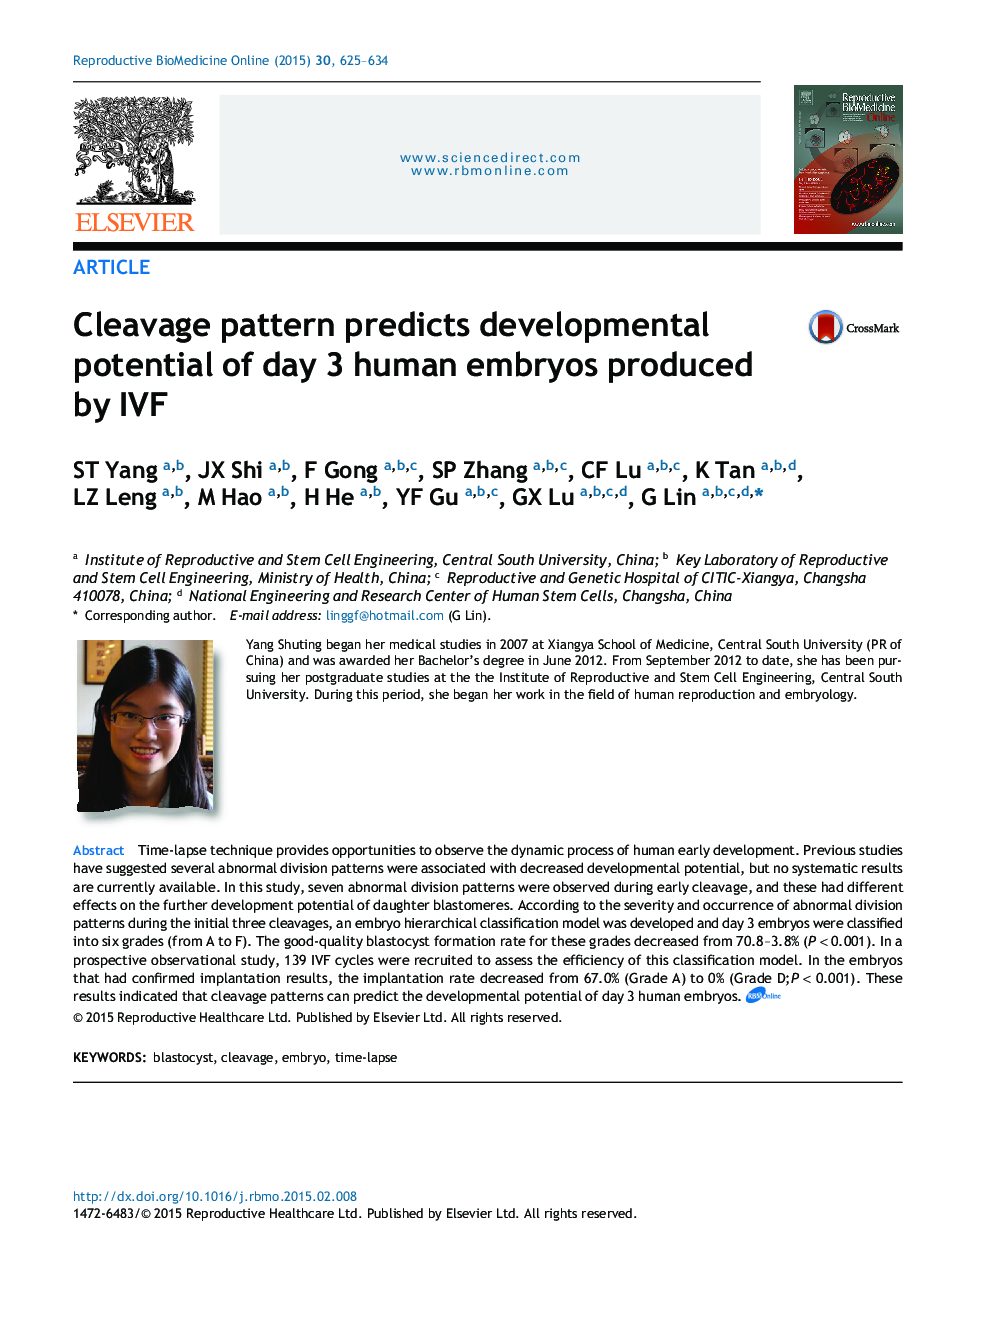 Cleavage pattern predicts developmental potential of day 3 human embryos produced by IVF